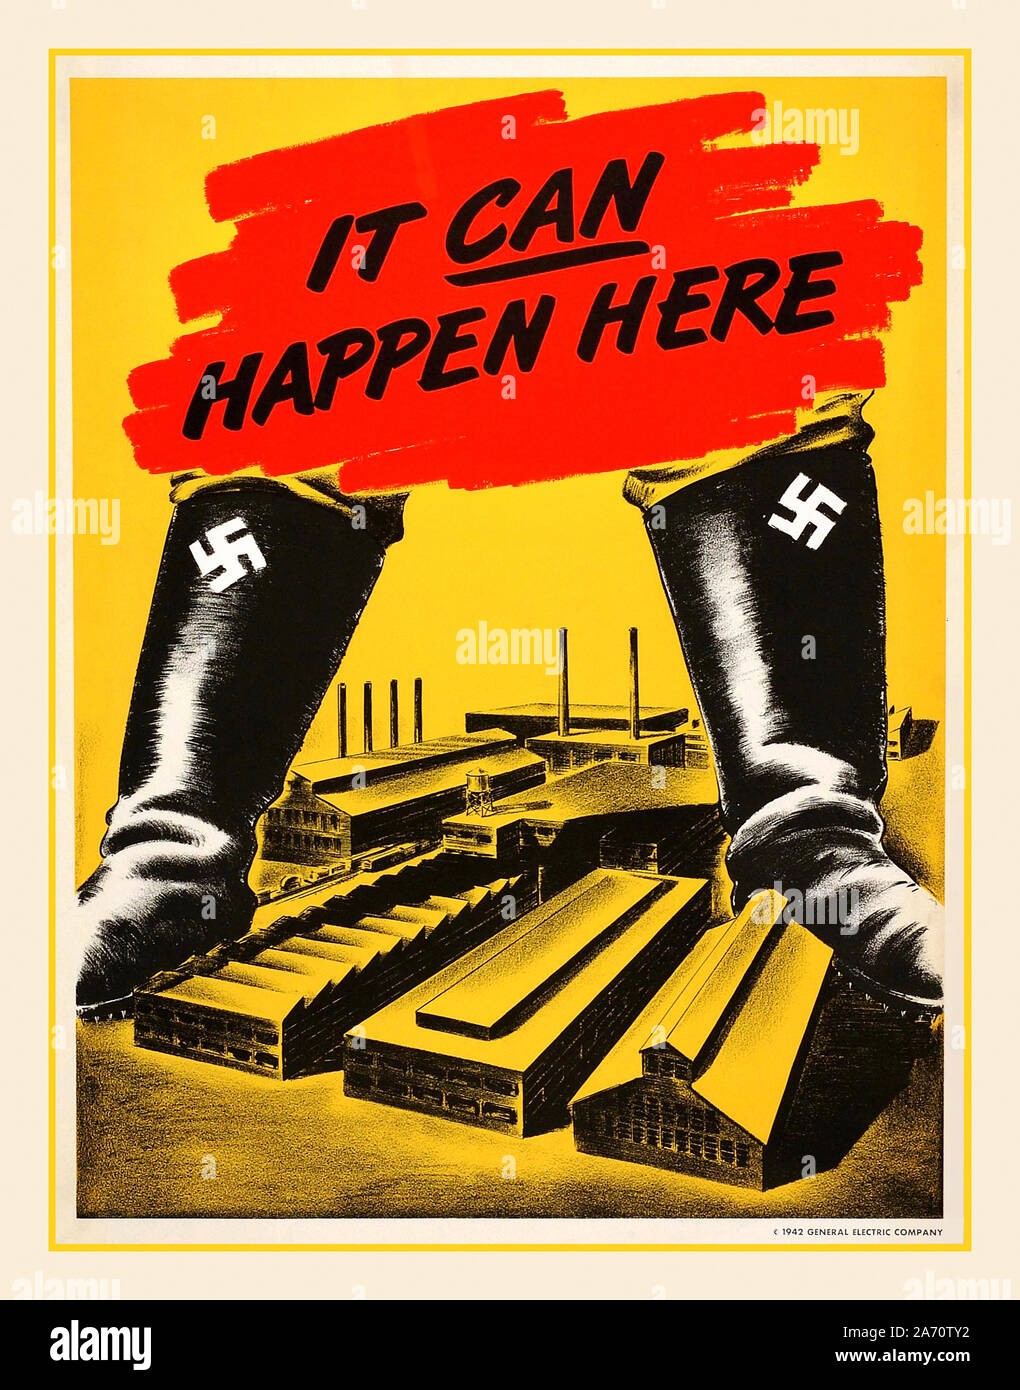 1942 WW2 American Production Output Propaganda Poster  ‘IT CAN HAPPEN HERE’  GEC (GENERAL ELECTRIC COMPANY) Nazi Germany Jackboots with Swastikas astride an American industrial complex of factories motivational image to energise wartime production in the USA Stock Photo